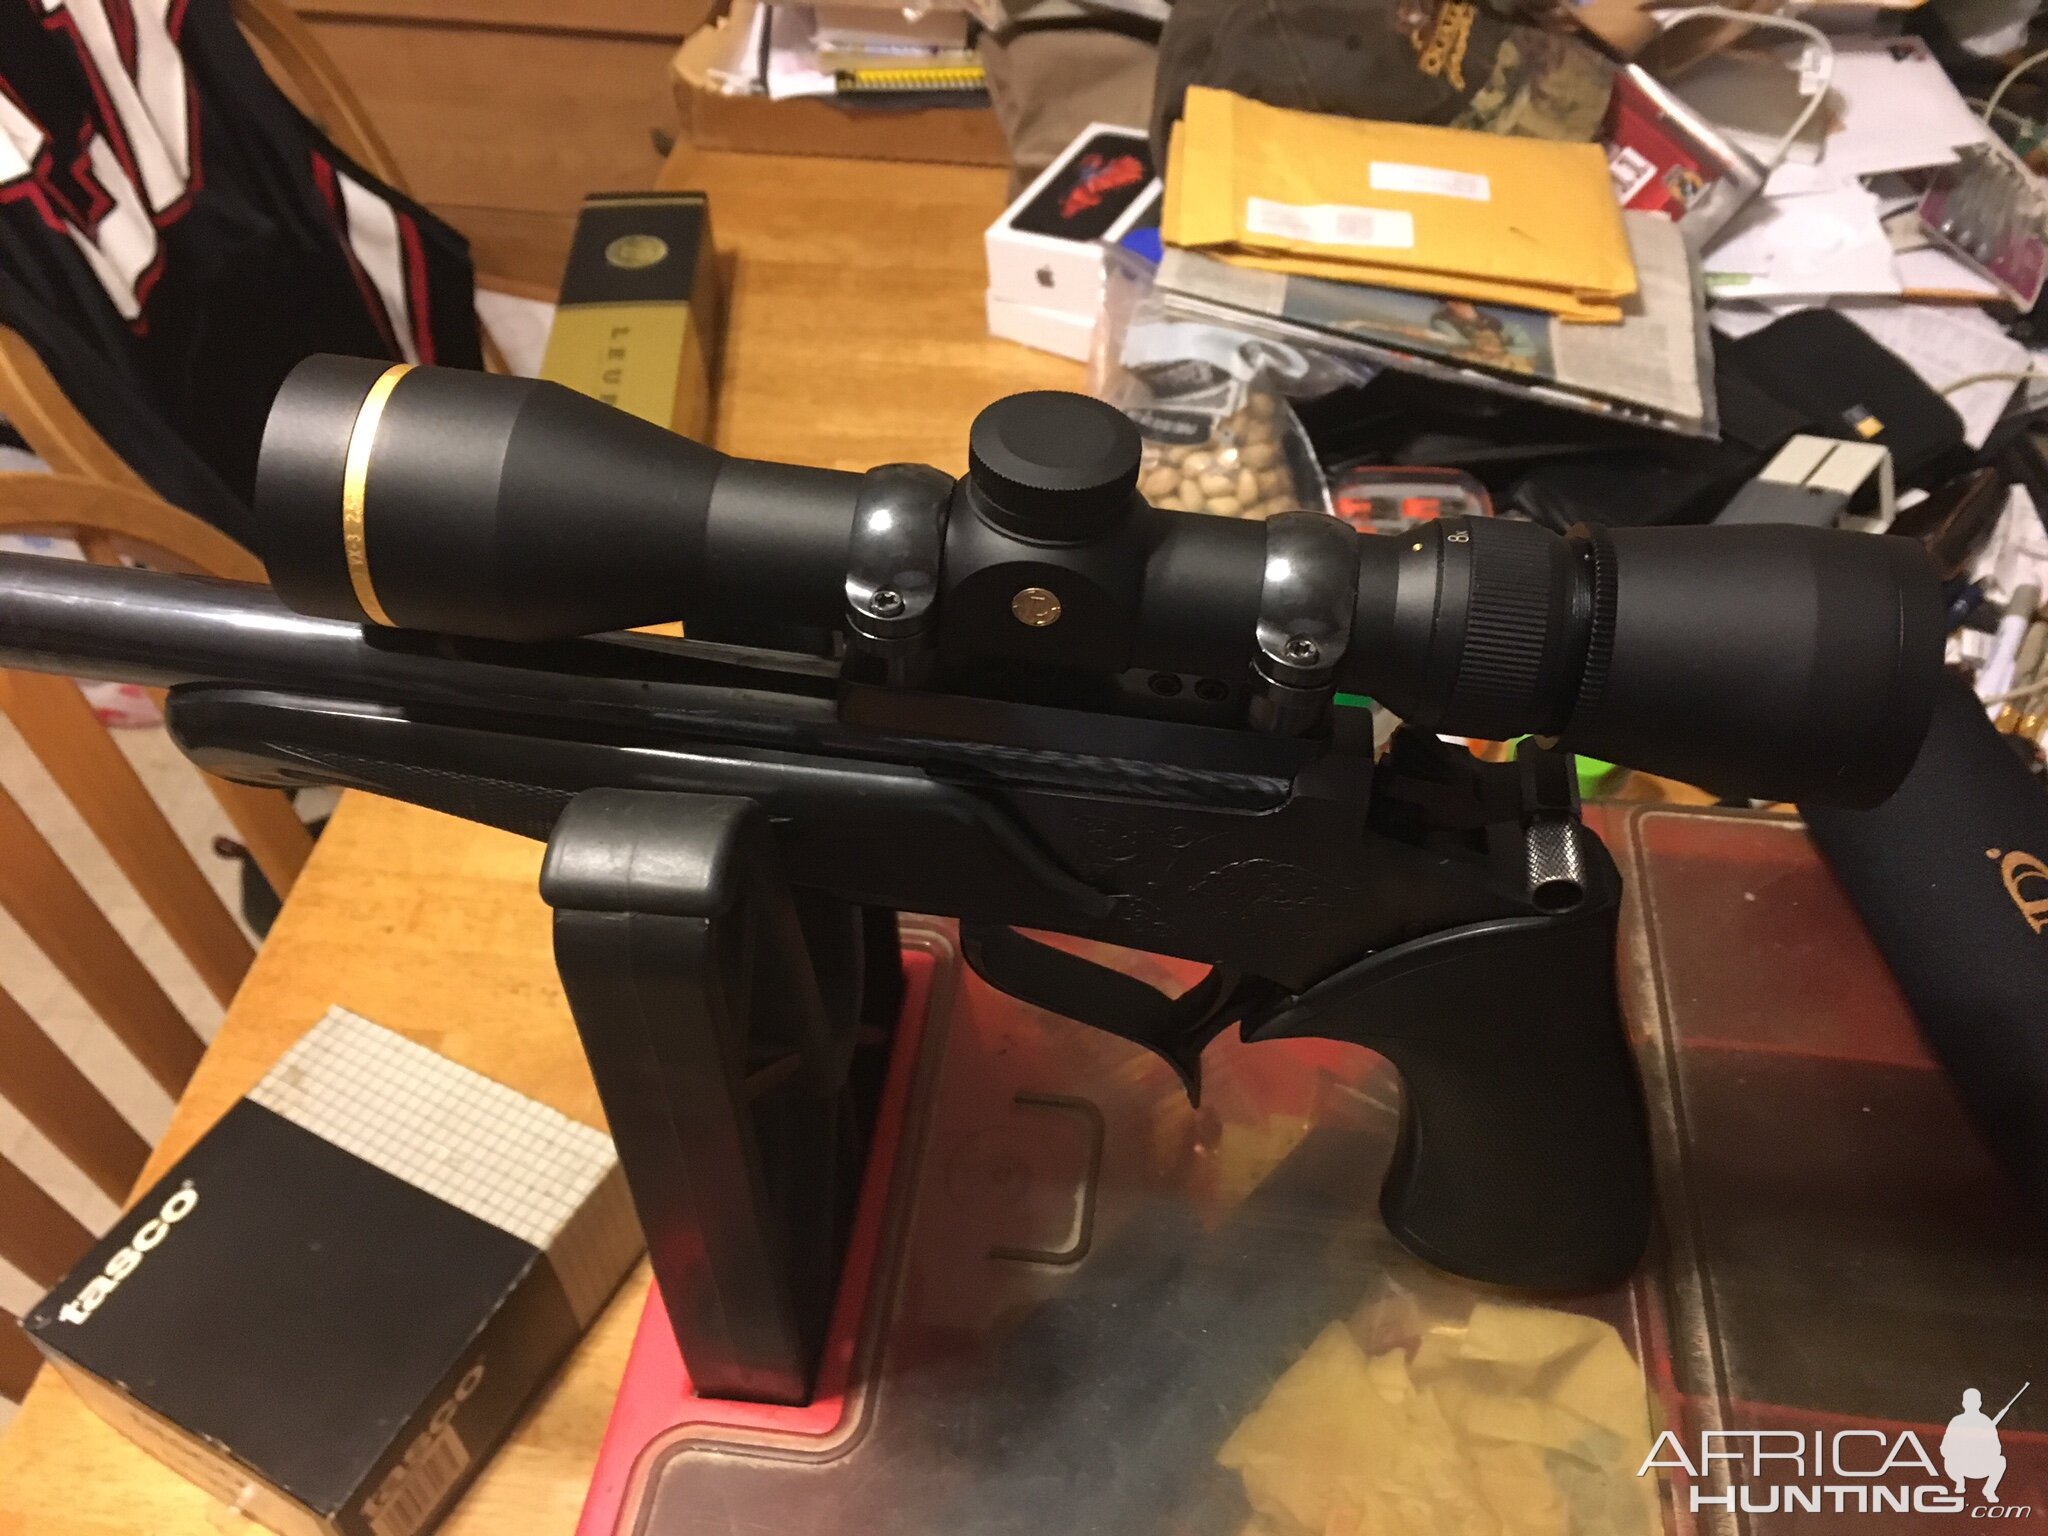 T/C Contender in .223 with Leupold 2.5-8x scope.